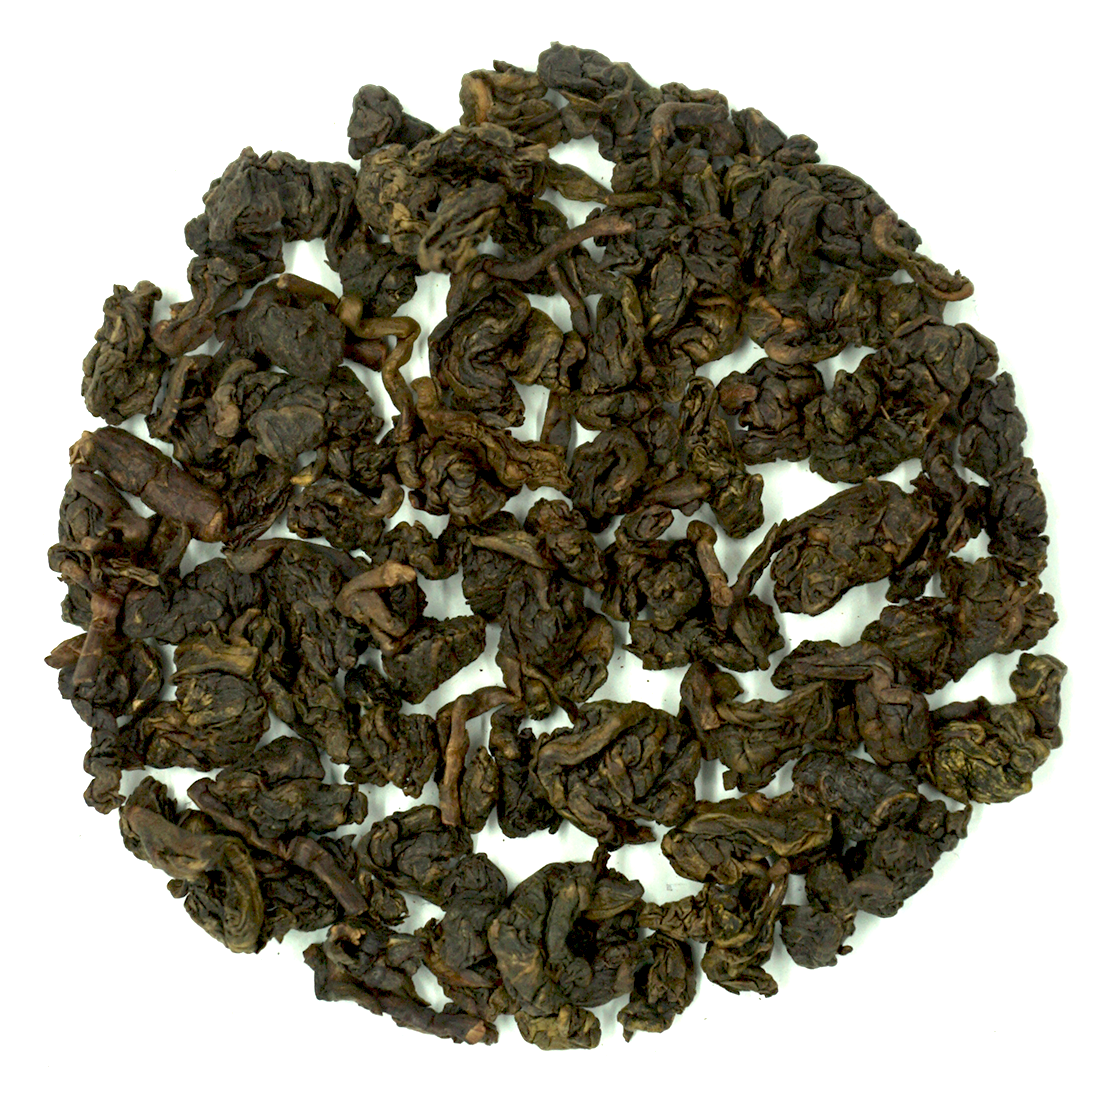 Roasted Dong Ding Oolong Tea